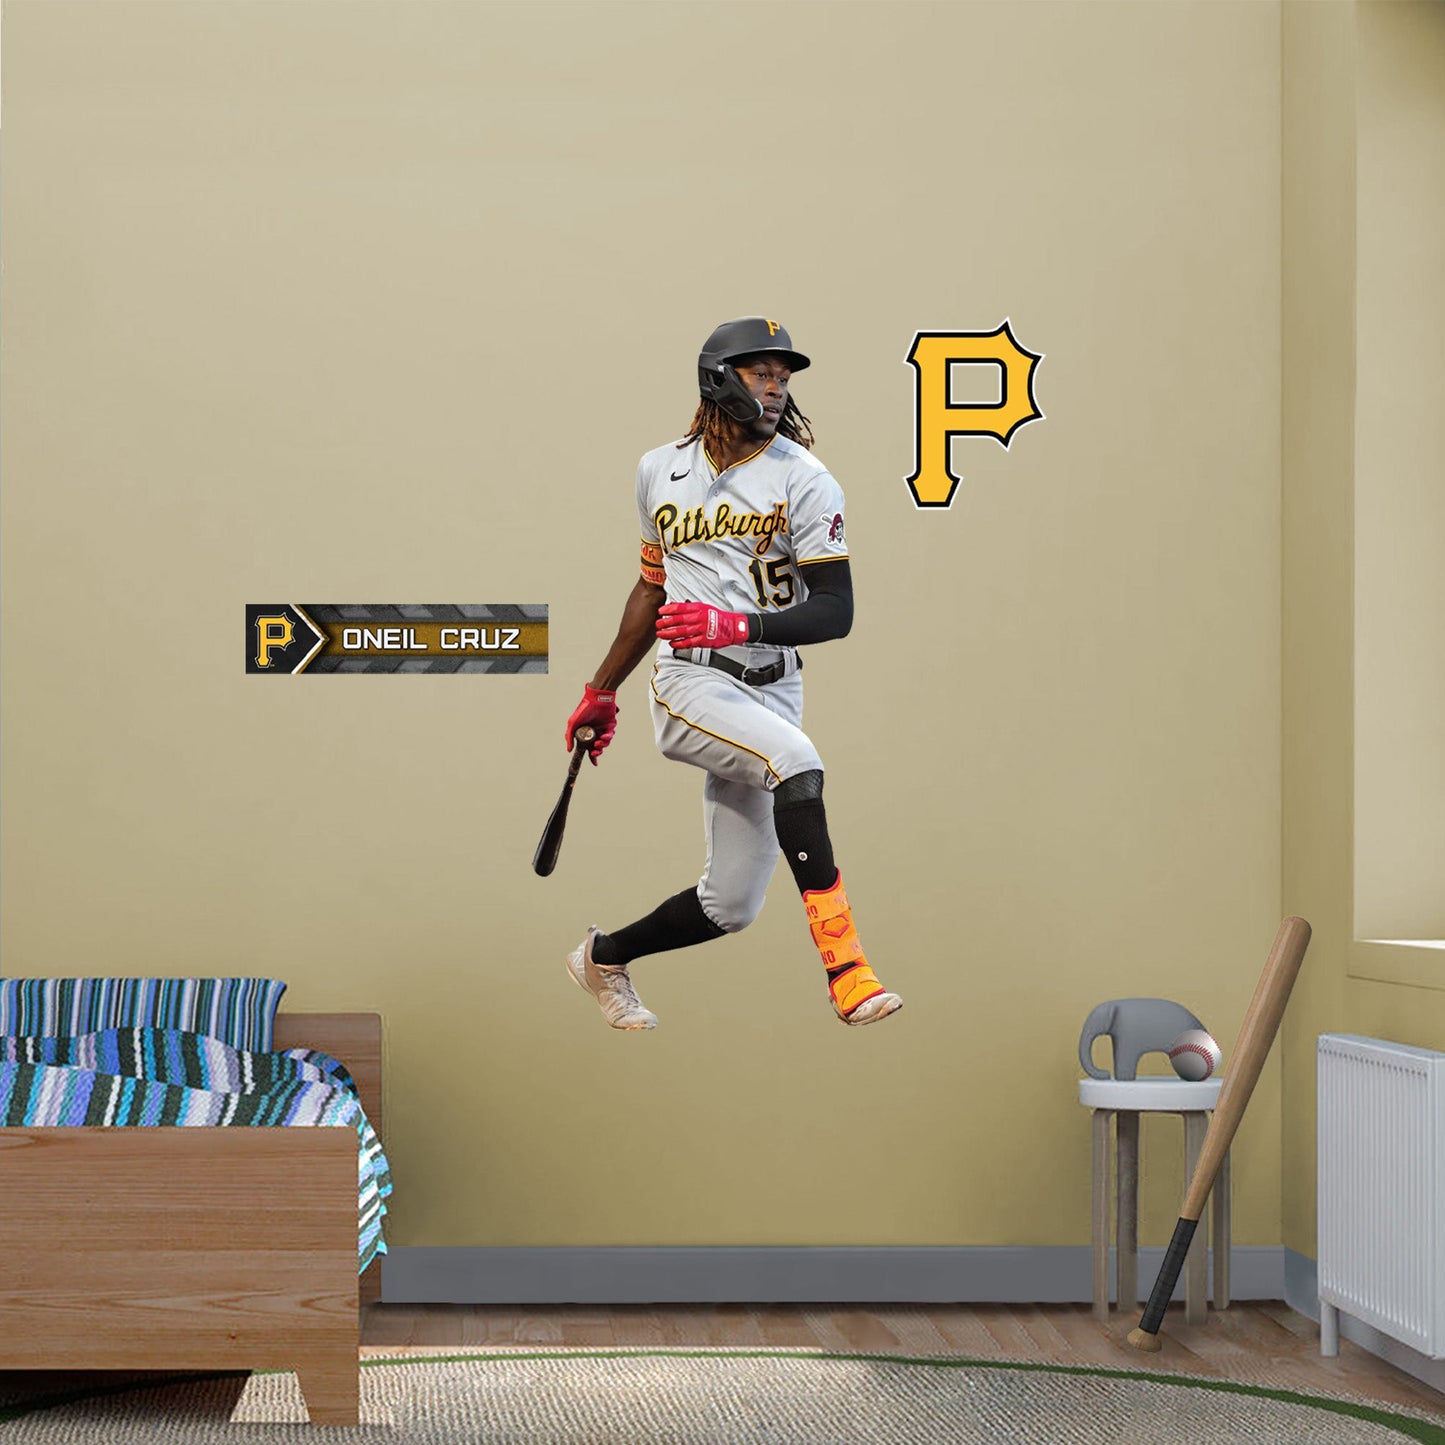 Pittsburgh Pirates: Oneil Cruz - Officially Licensed MLB Removable Adhesive Decal